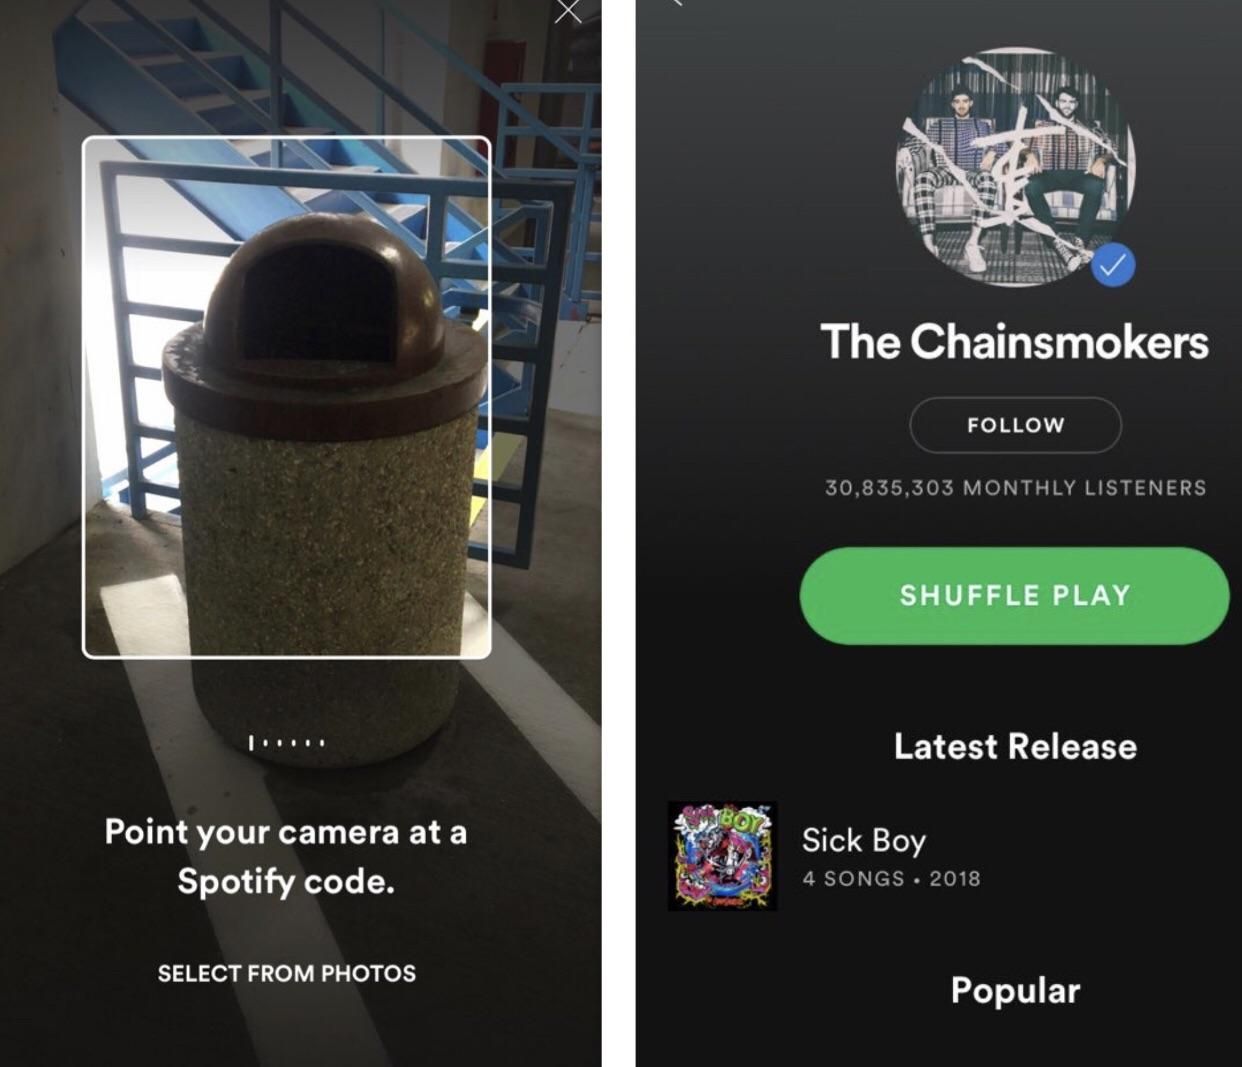 Wow, this new Spotify feature is so cool!